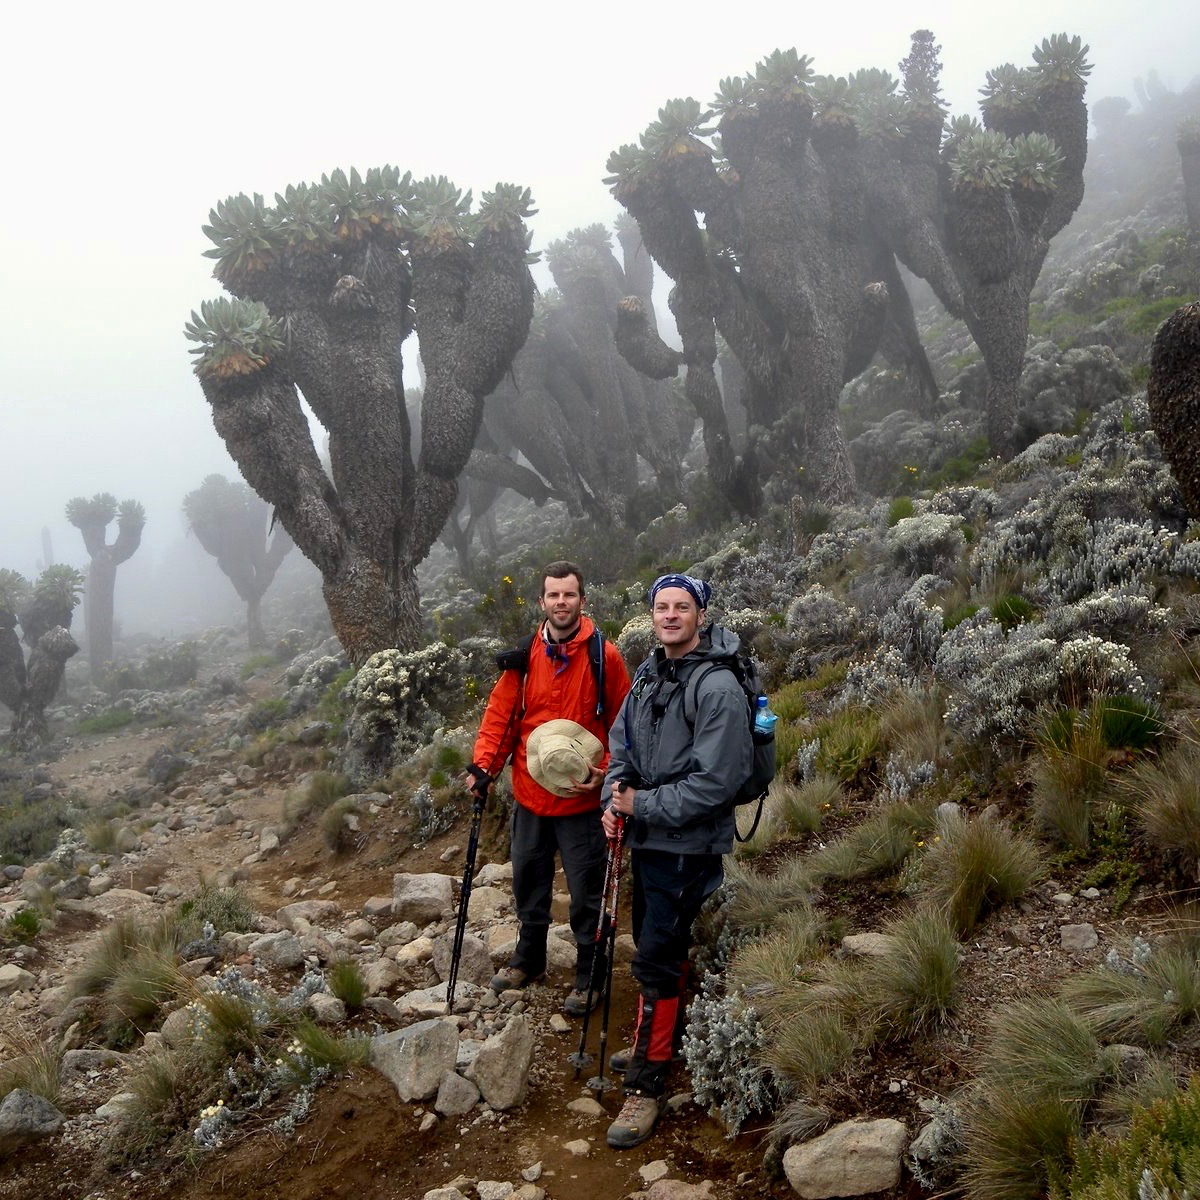 Matthew Kessi and his friend Shawn hiking through an unusual forest of big bushy trees which are surrounded by medium boulders and low sage like bushes.  The fog in the background creeps in on the trees and hikers.  This is a mid-level area on the way to the summit of Mt. Kilimanjaro.